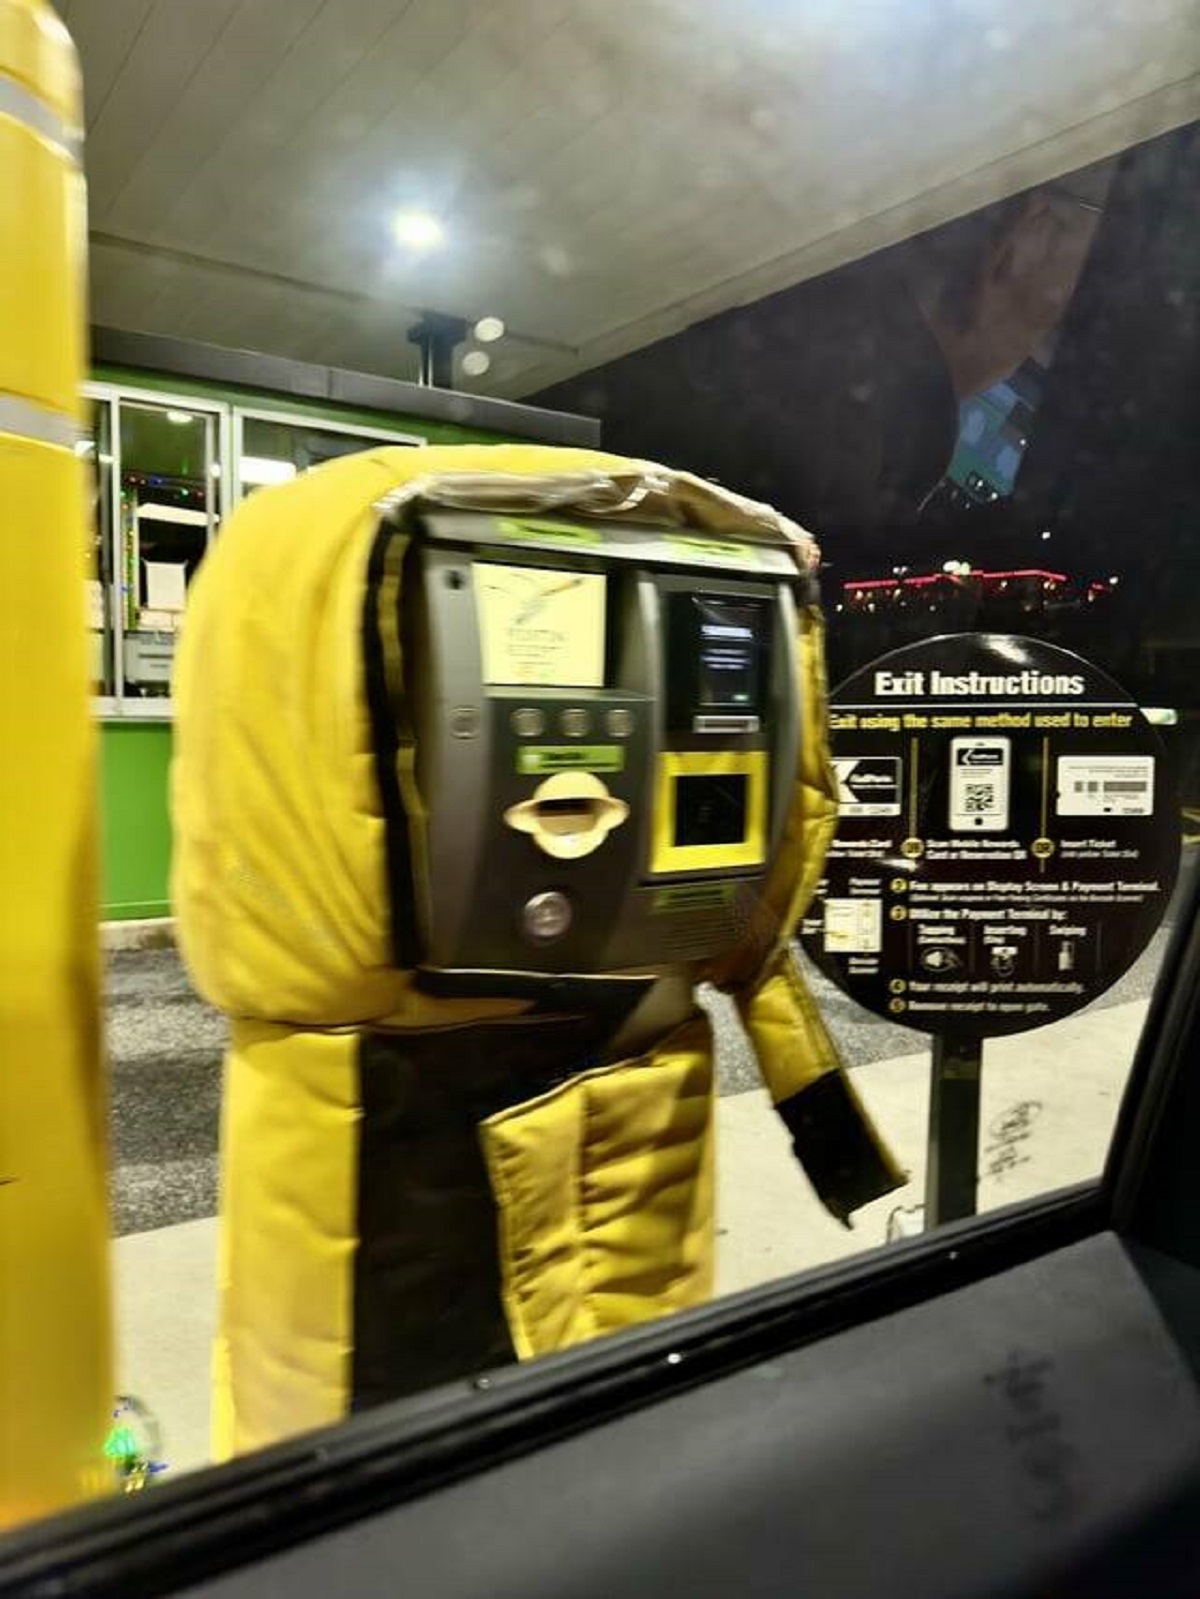 "Parking meter wearing a little winter jacket, perfectly sized"